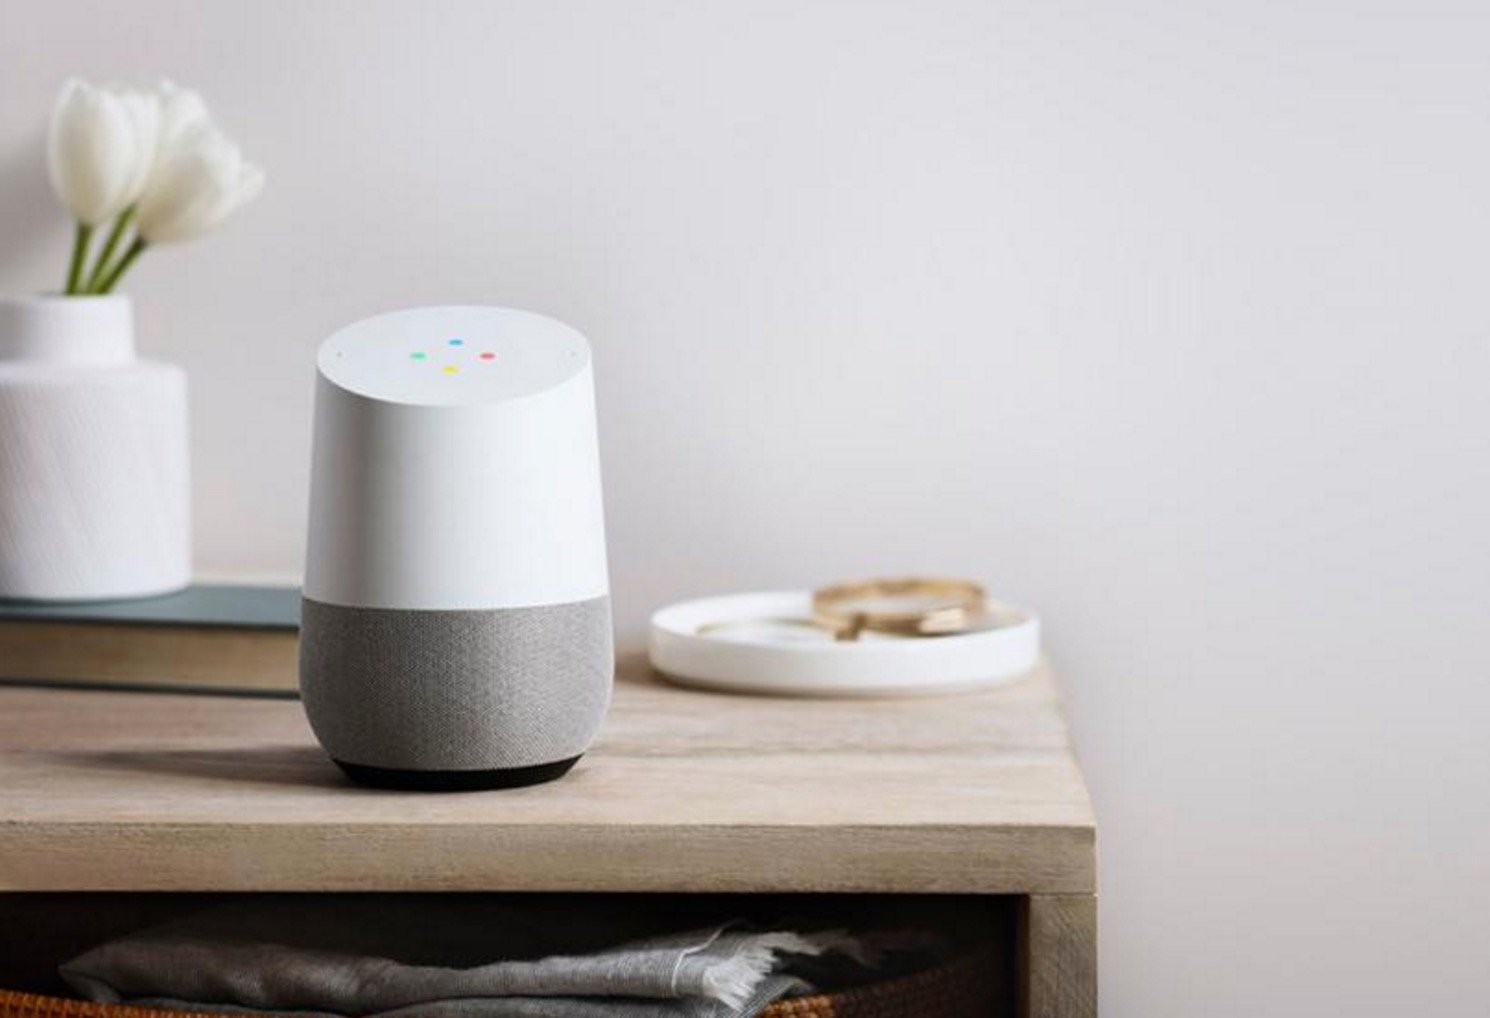 This is Google Home.